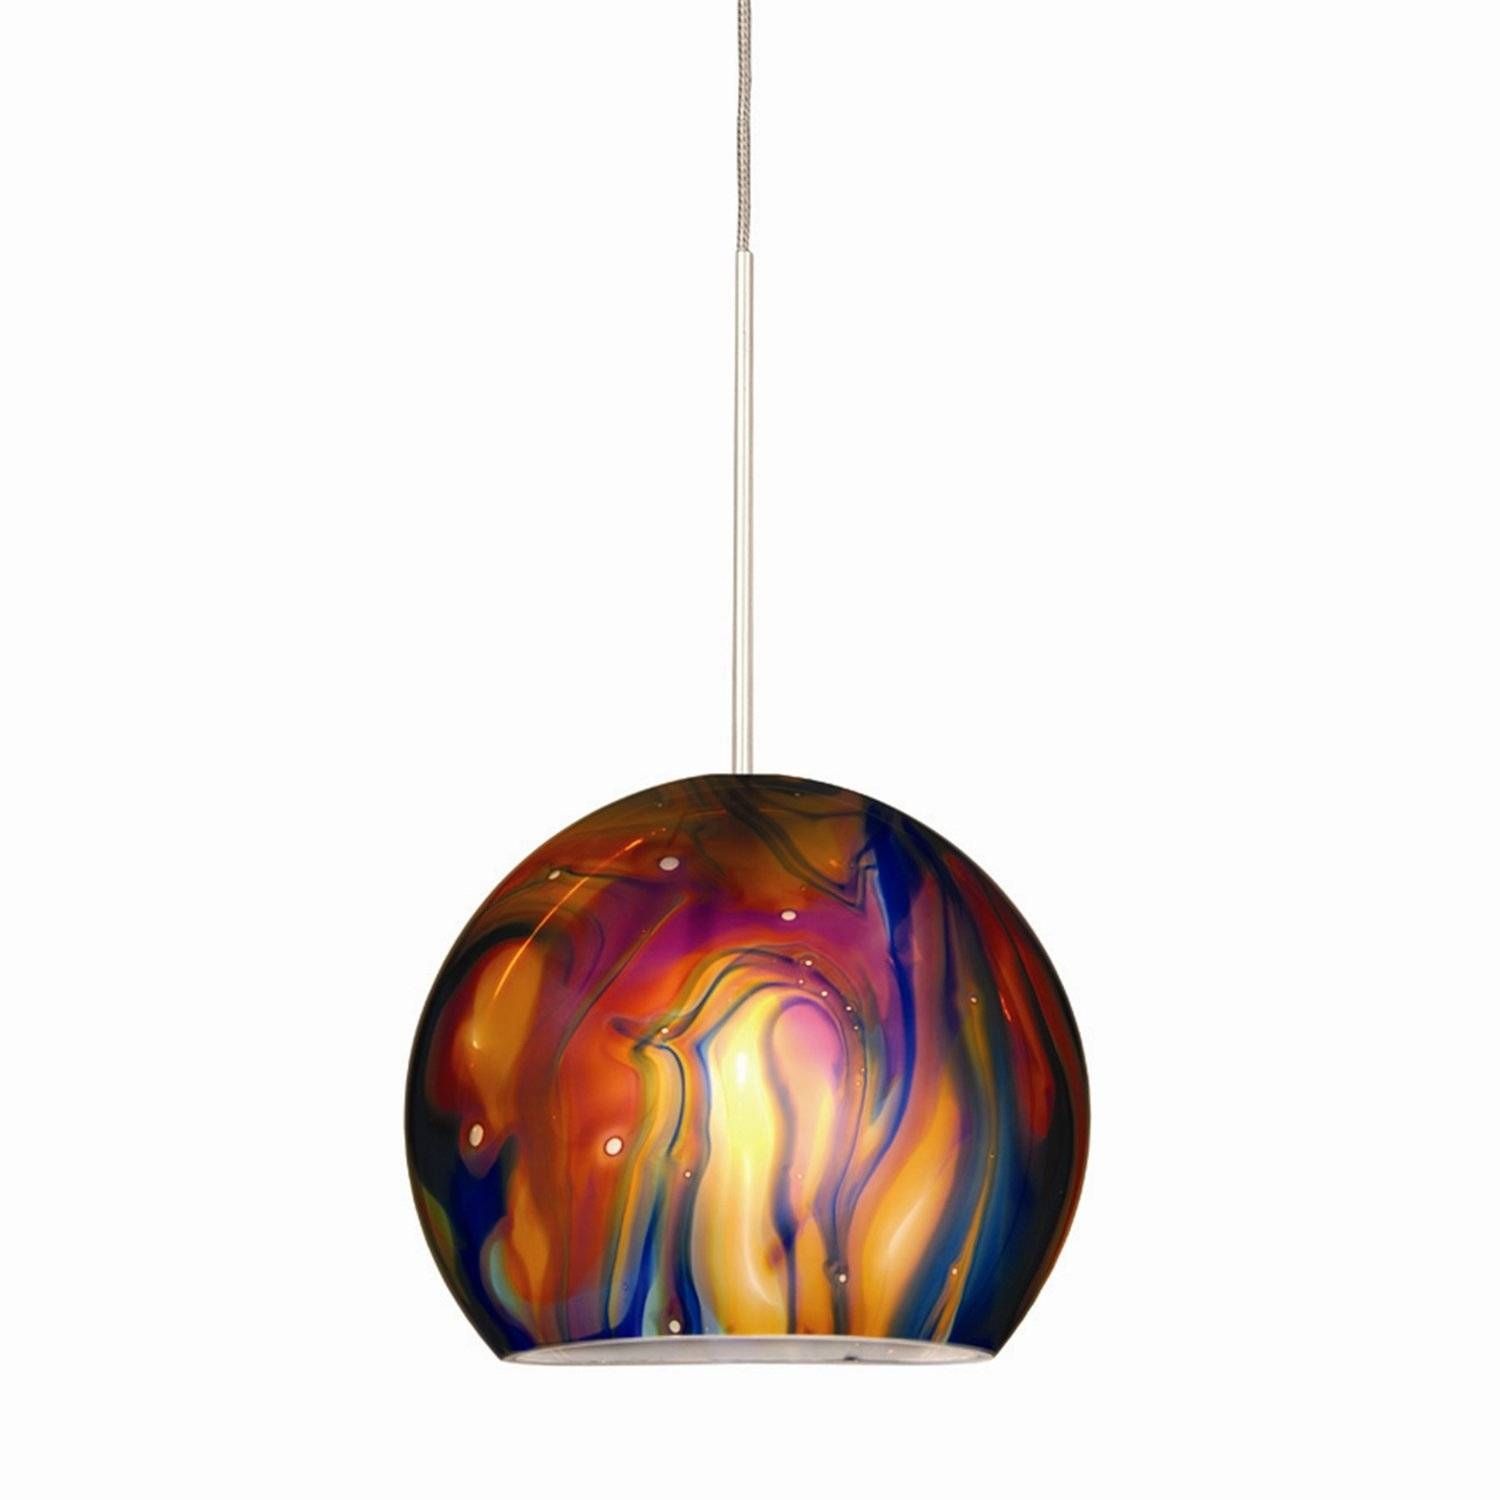 New Blown Glass Pendant Light 97 For Tech Lighting Pendants With Regarding Tech Lighting Australia (View 14 of 15)